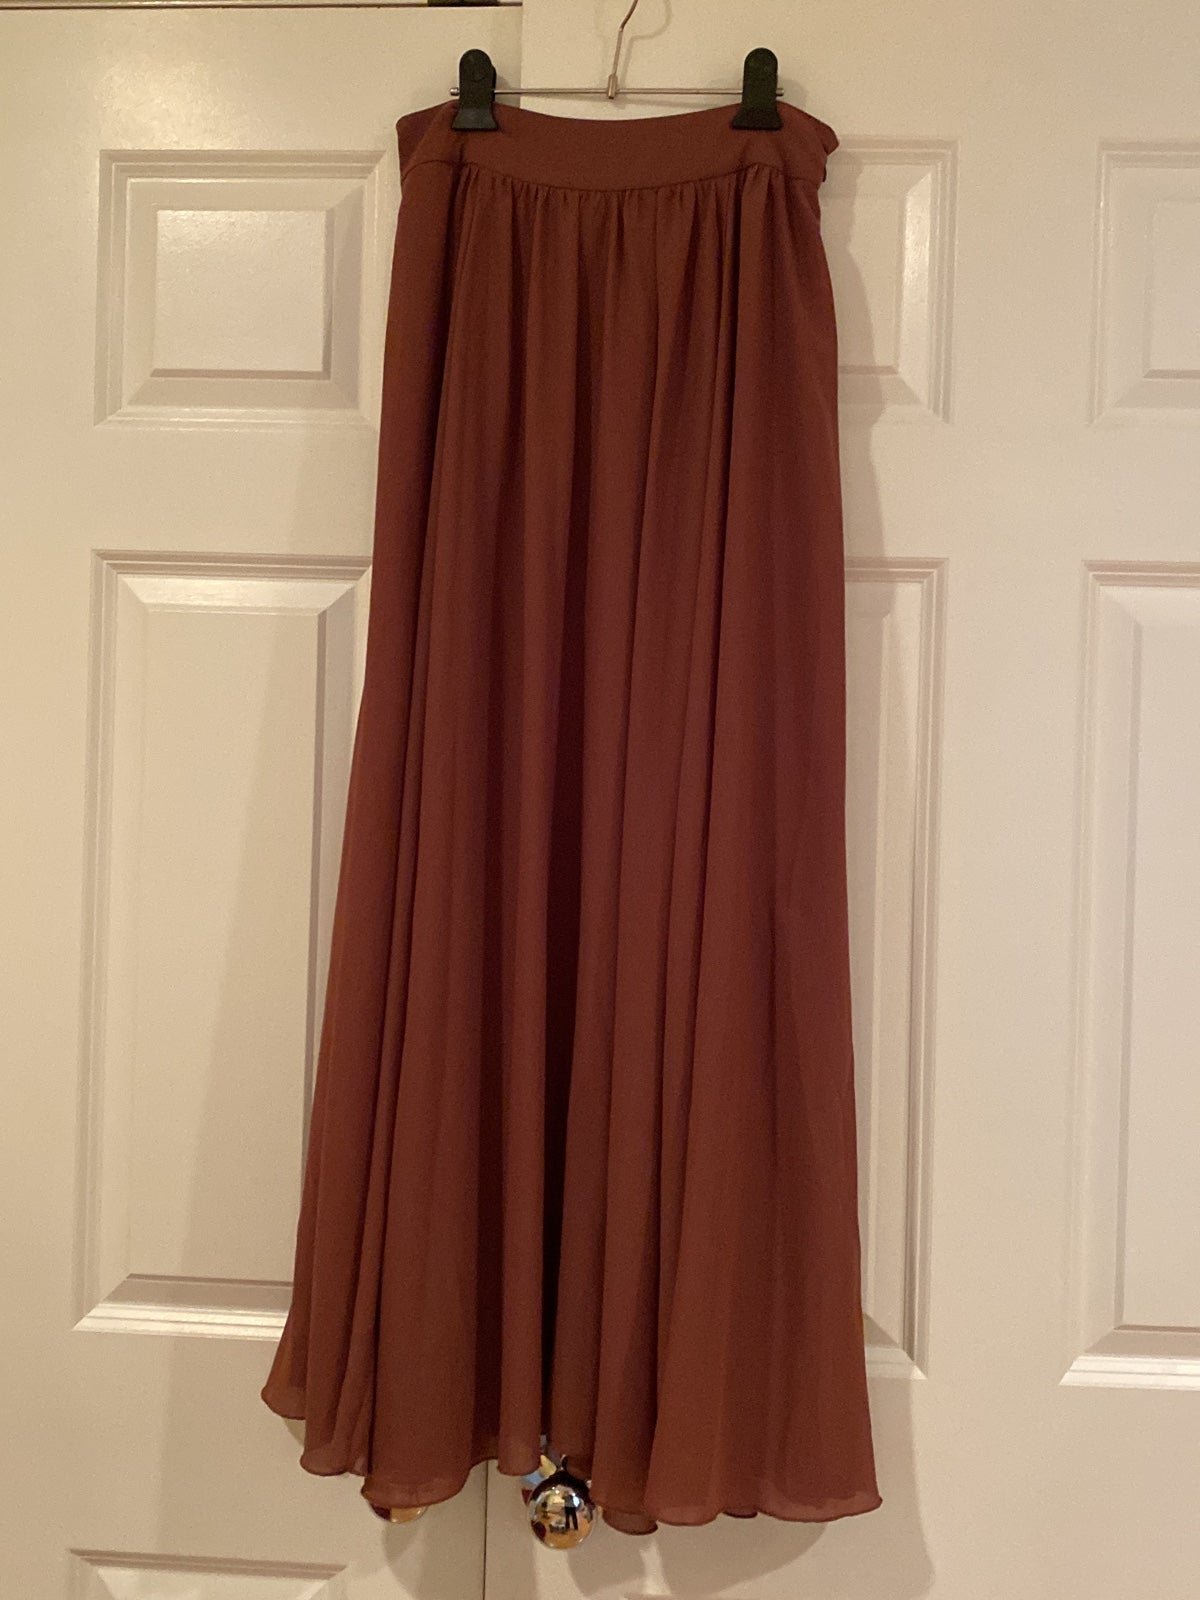 Factory Direct  Anthropologie Maxi Skirt tag size 0 but runs big! jFX0lJnW1 Hot Sale